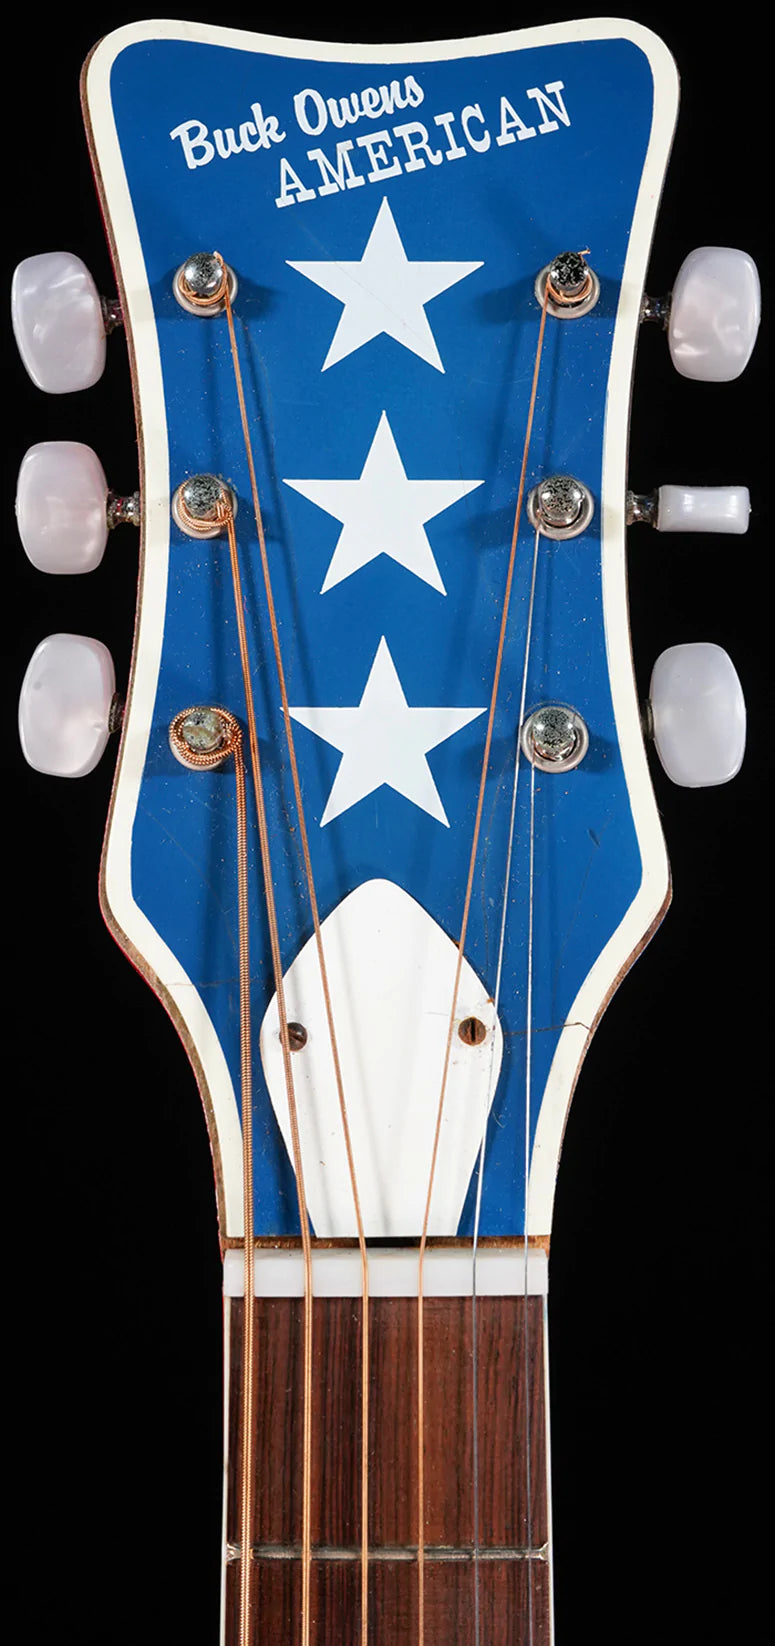 Buck Owens and the Red, White, and Blue